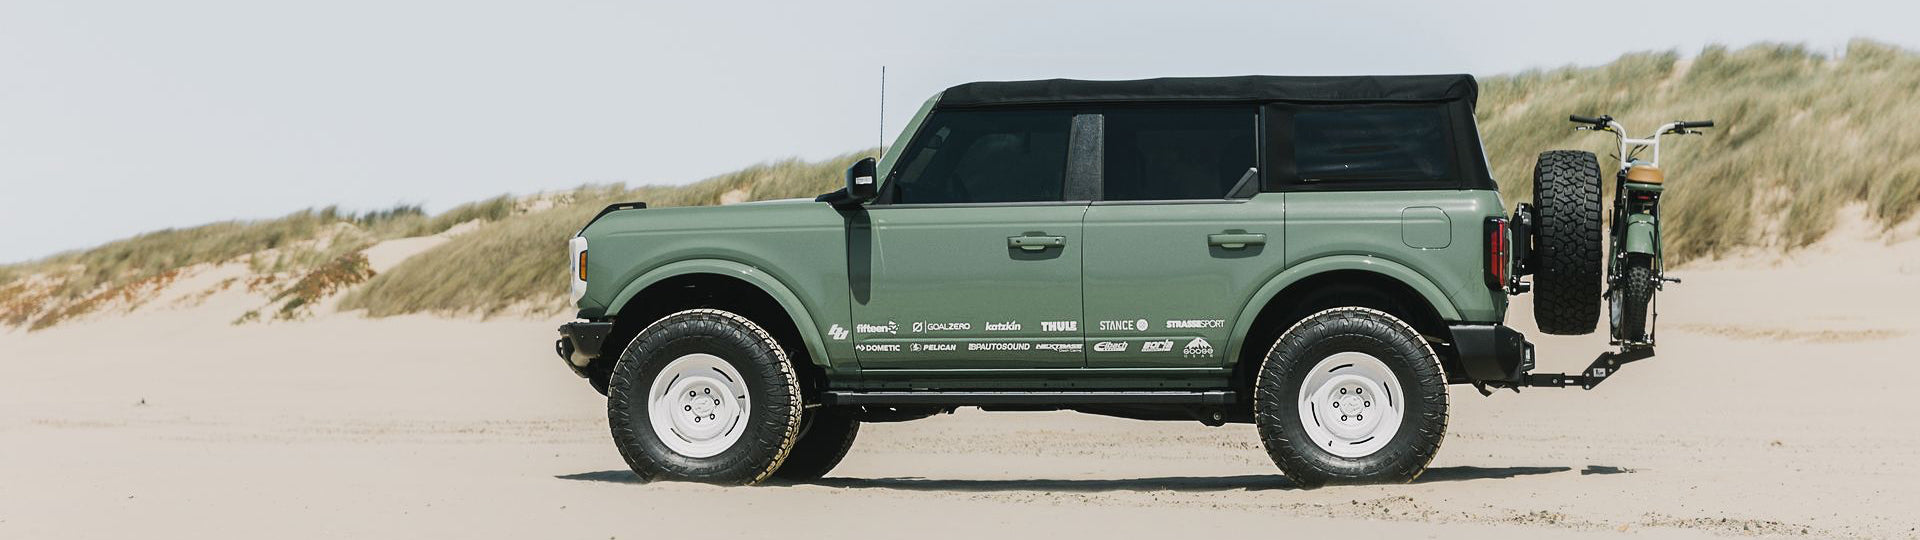 Ford Bronco 2021 Build - Boxwood Green